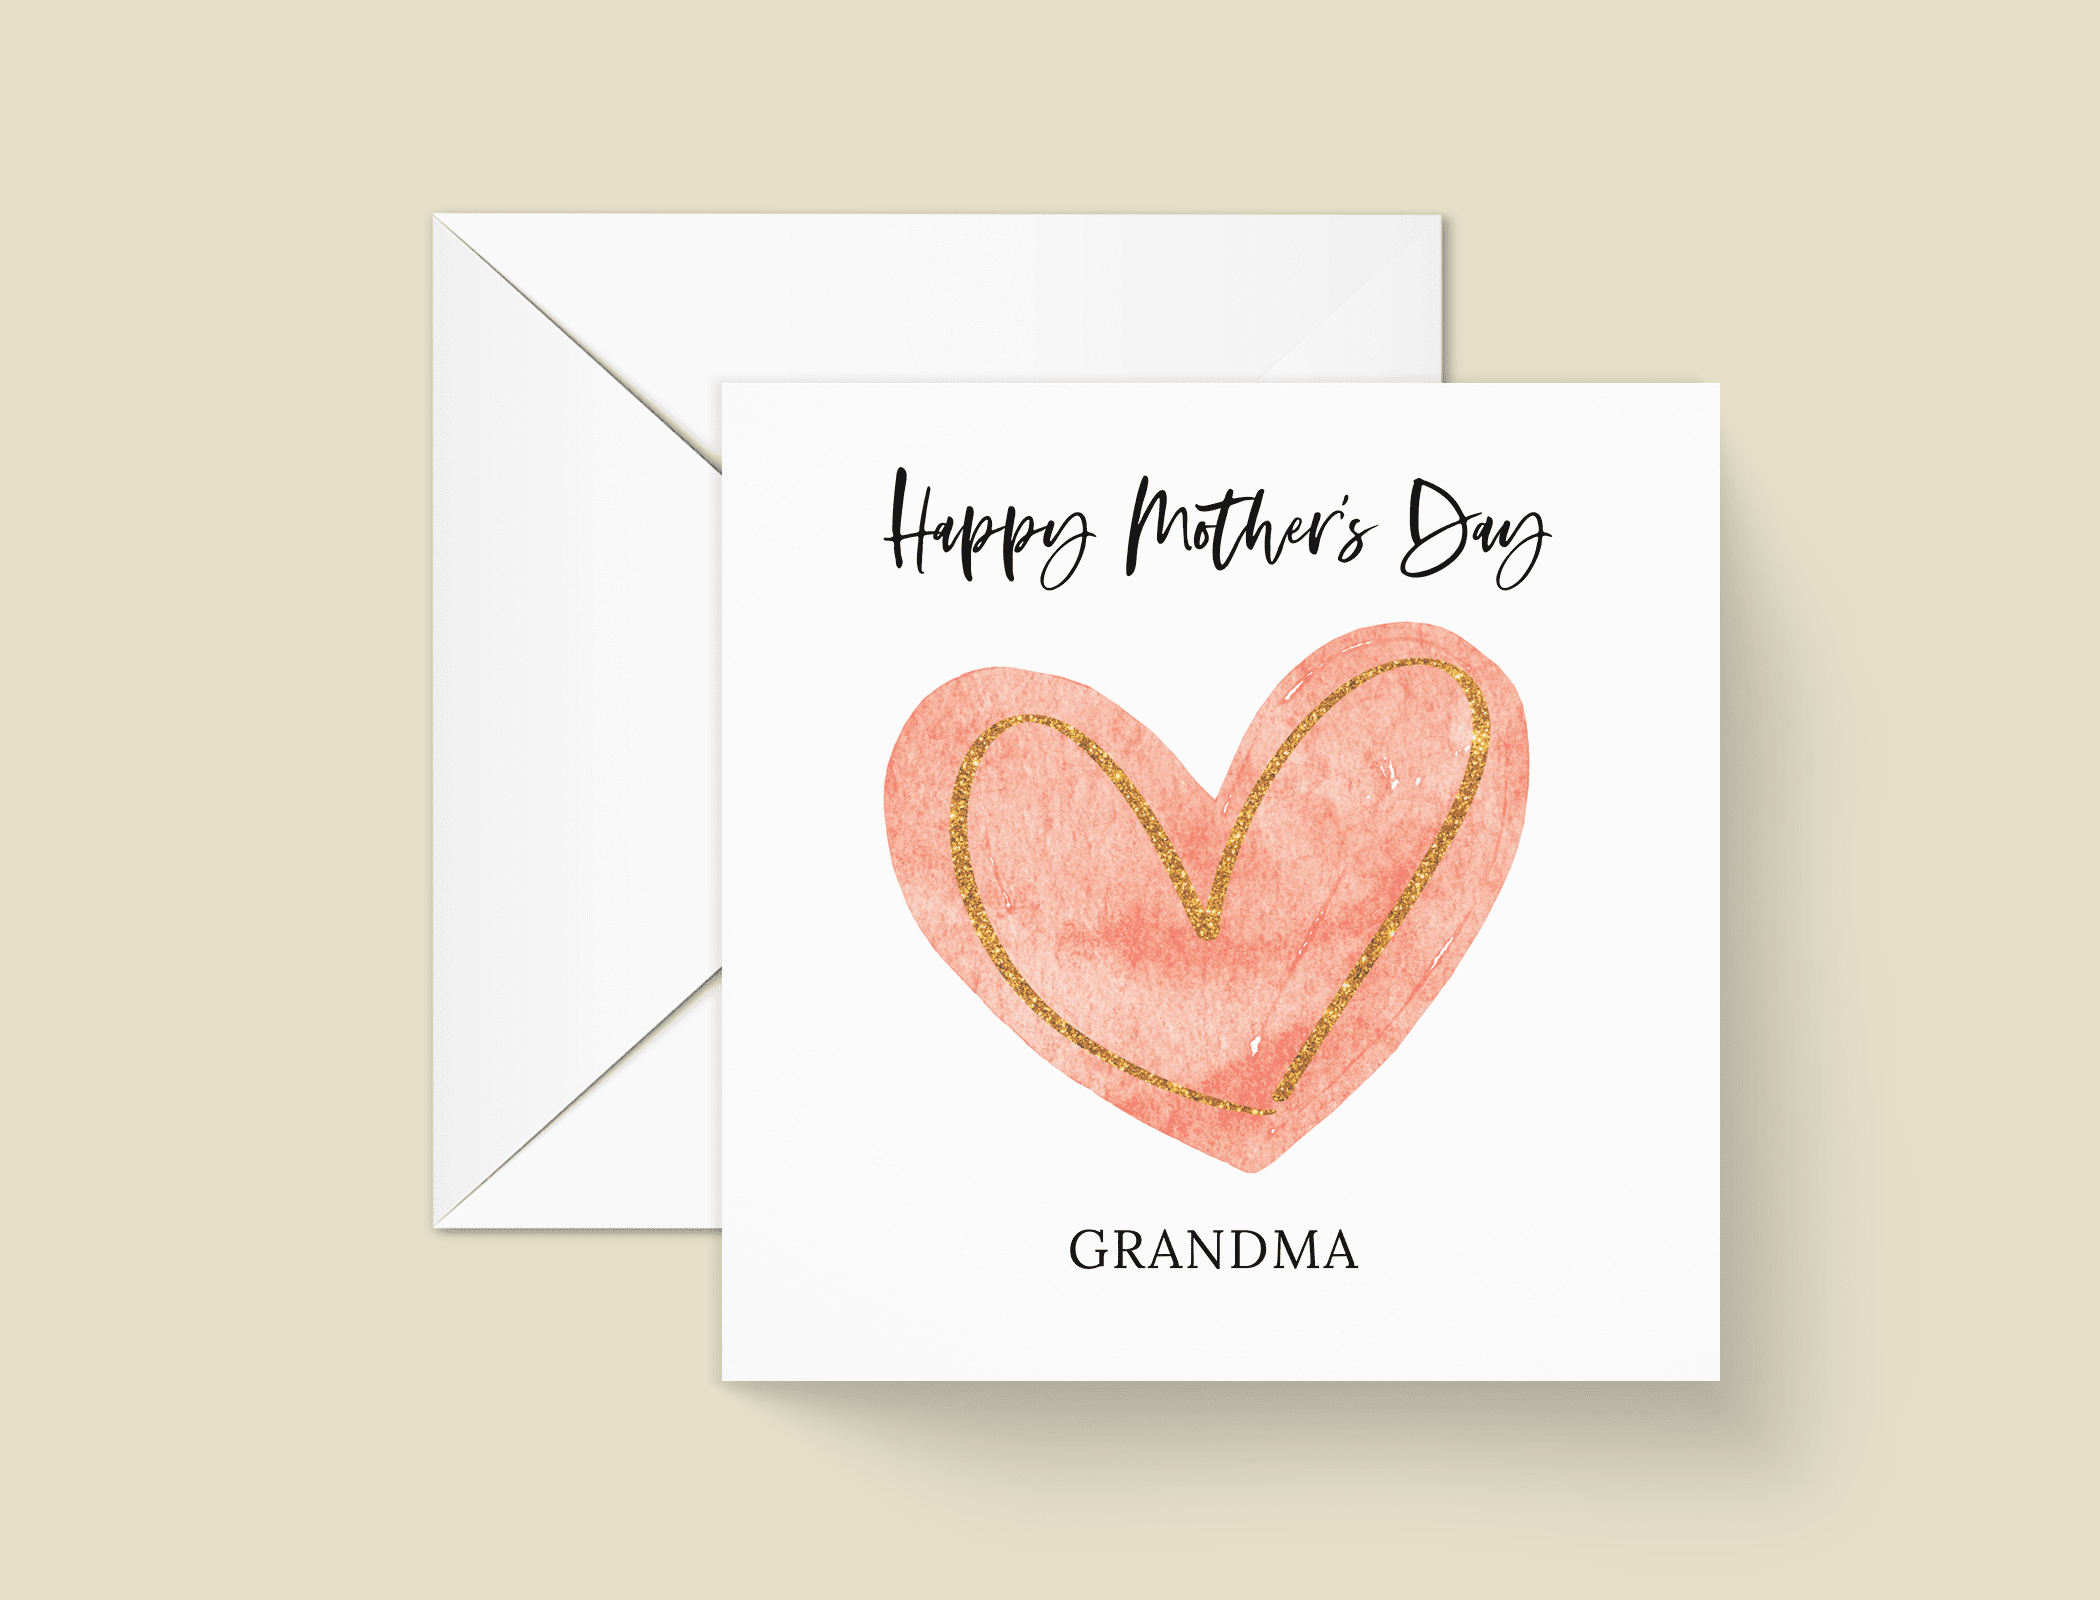 Happy Mother’s Day Grandma Card